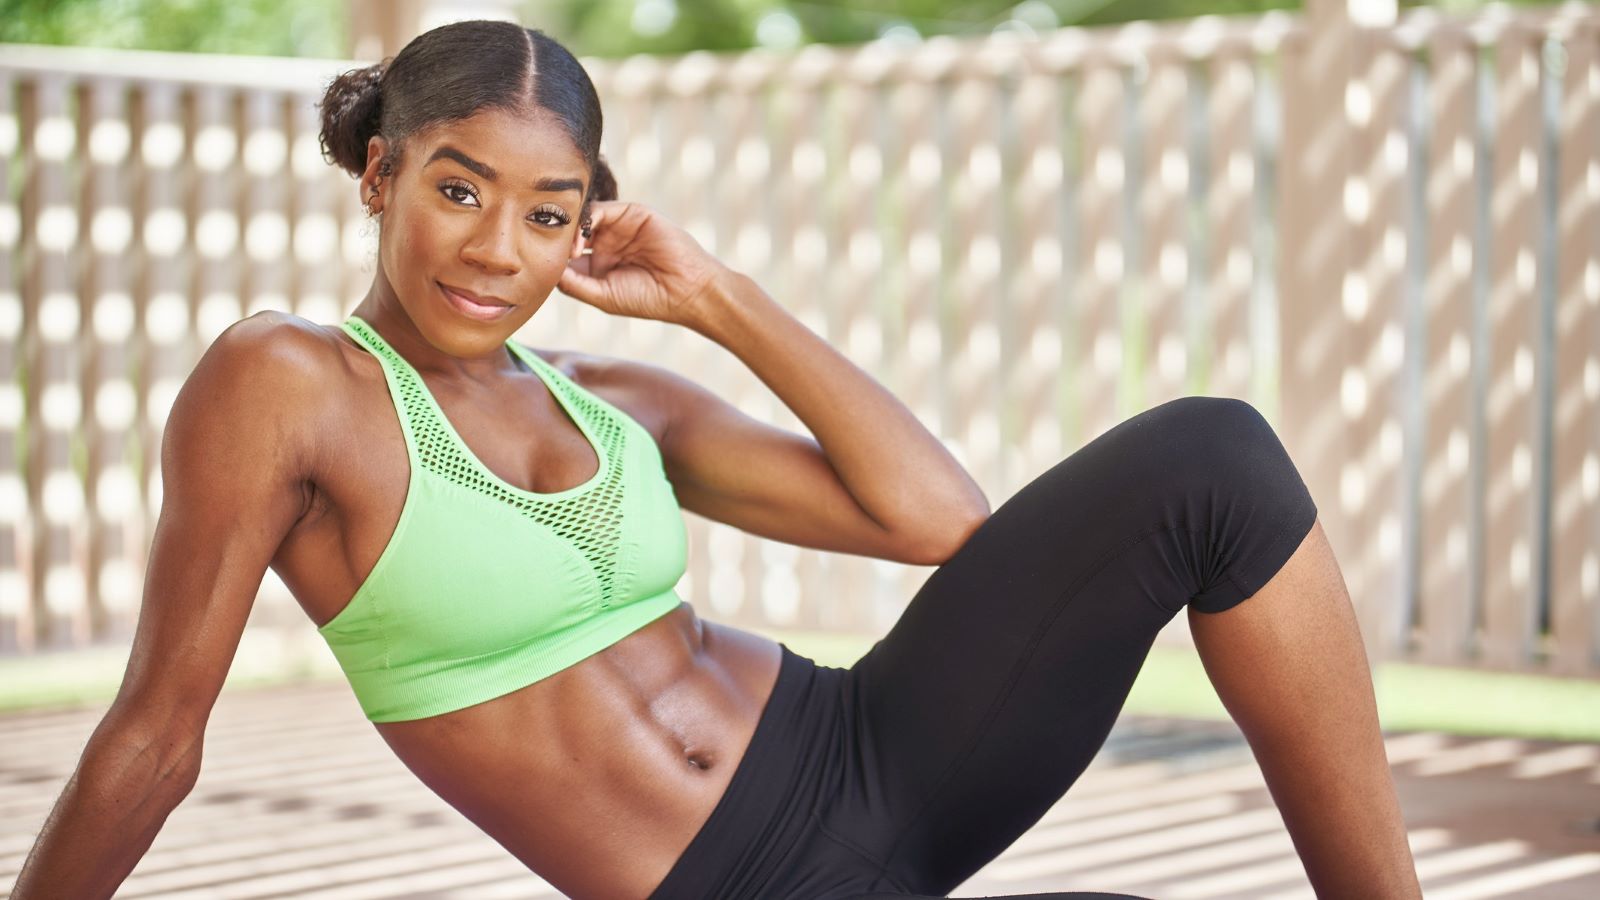 How To Get A Six-Pack According To Women Who Have One